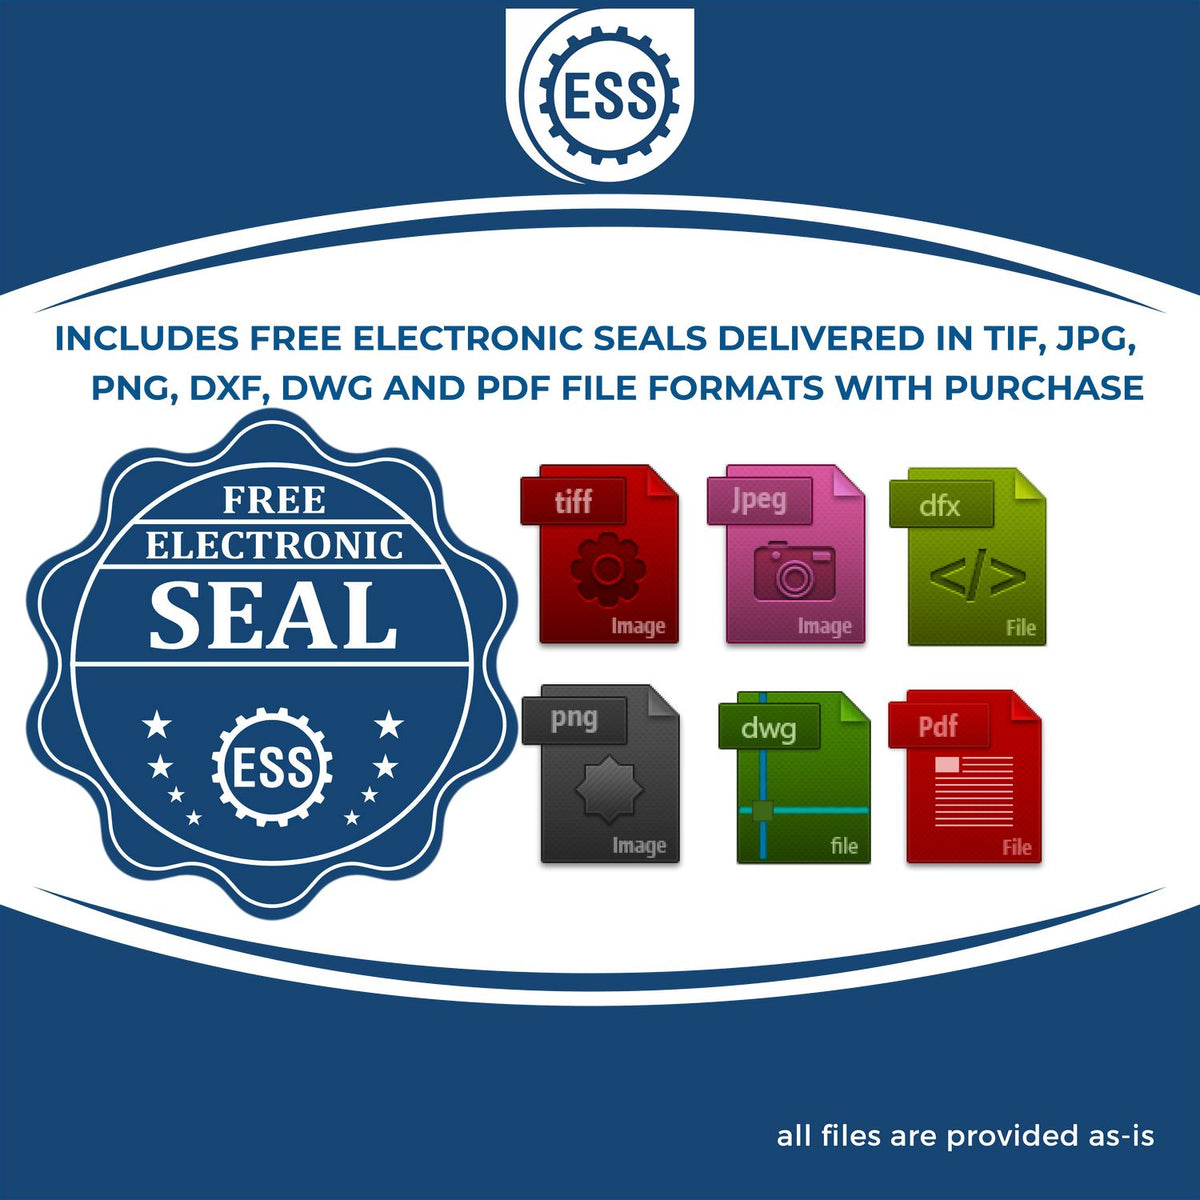 An infographic for the free electronic seal for the Gift Michigan Land Surveyor Seal illustrating the different file type icons such as DXF, DWG, TIF, JPG and PNG.